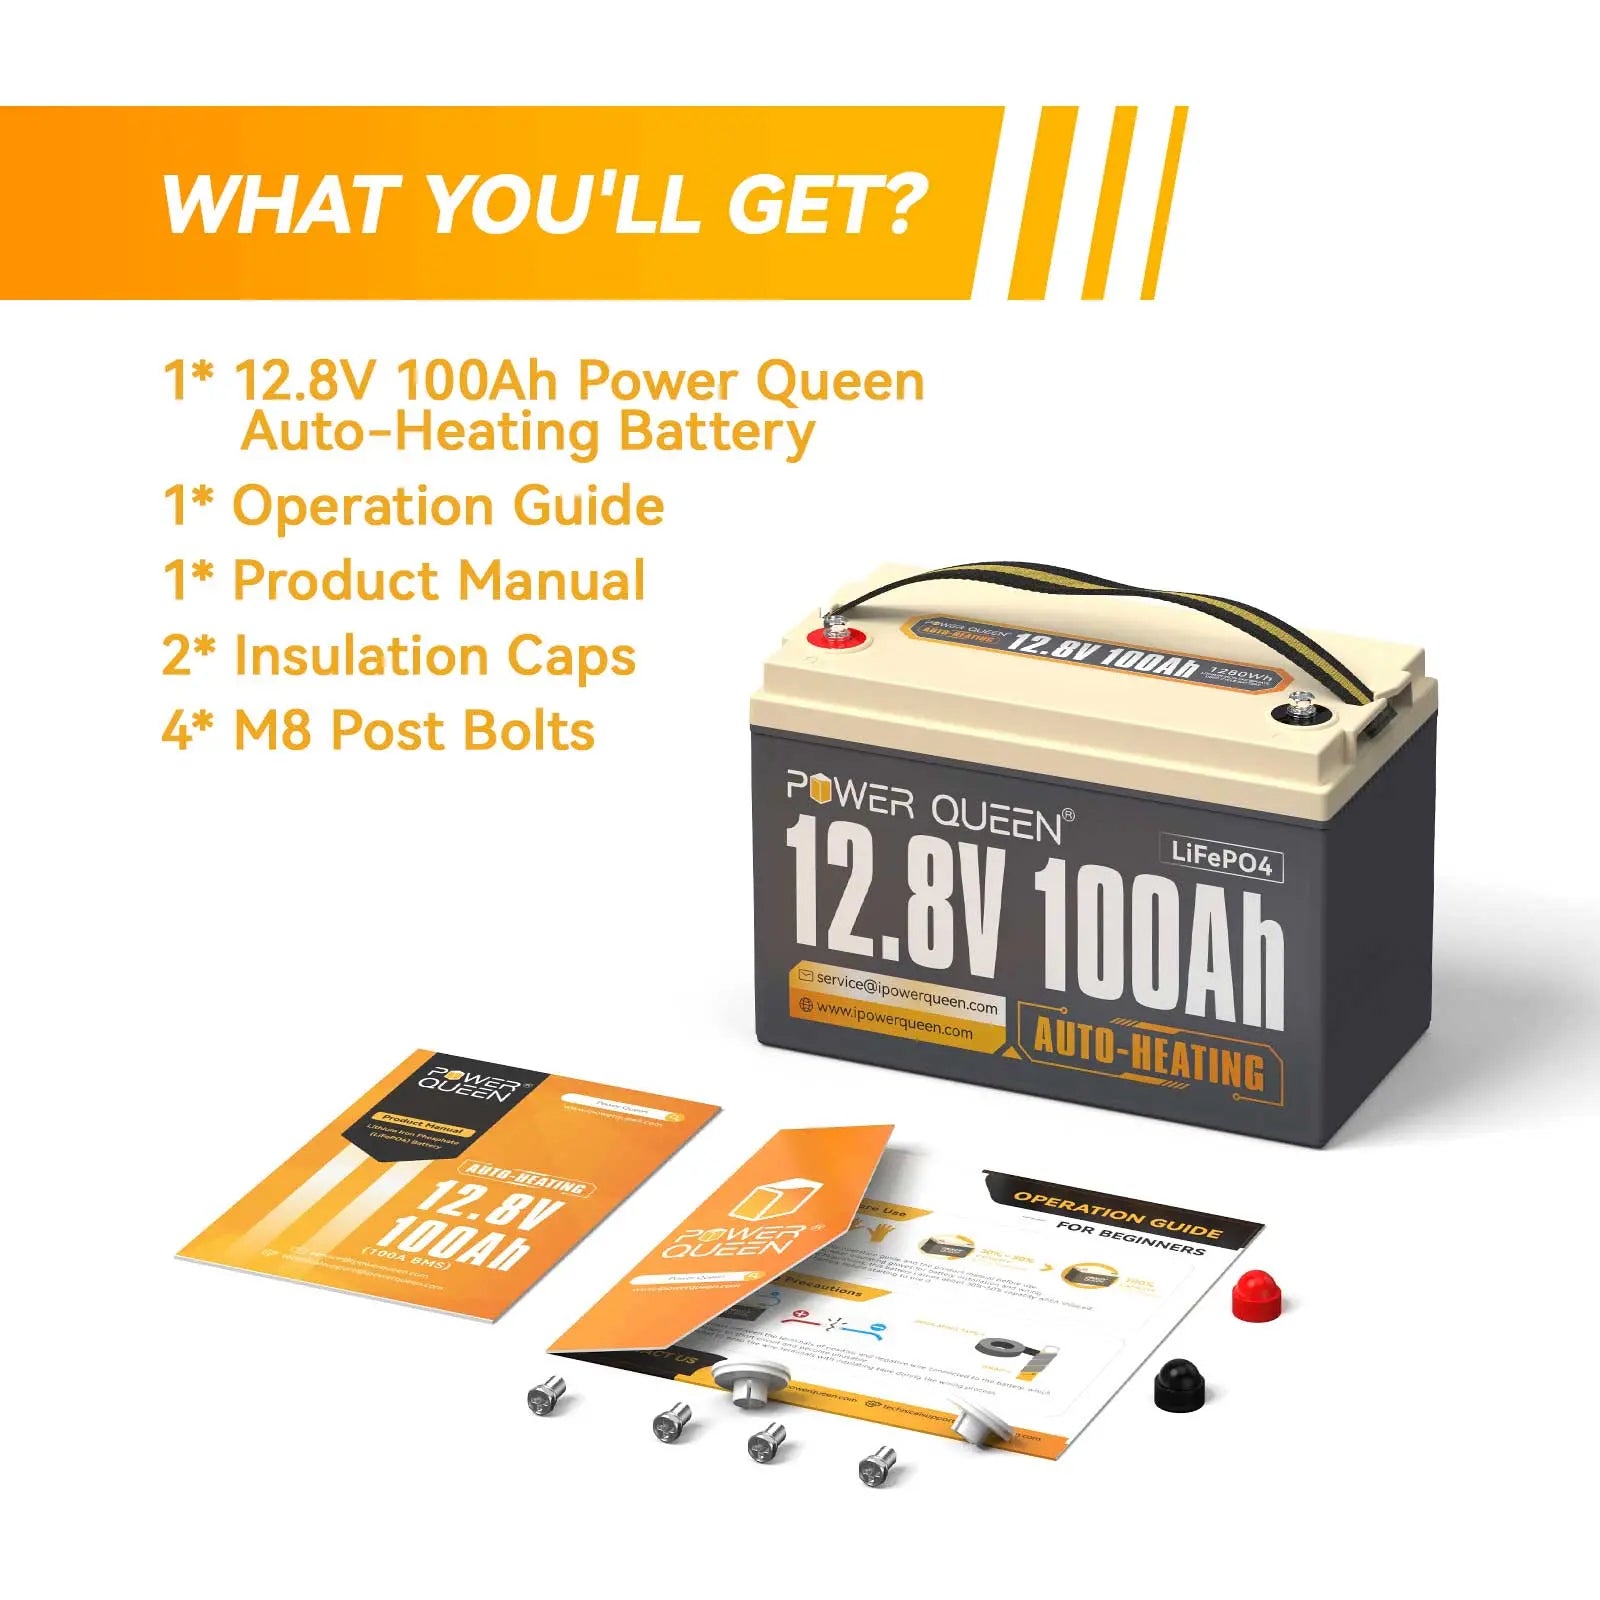 Power Queen 12V 100Ah Self-Heating Deep Cycle Lithium Battery services